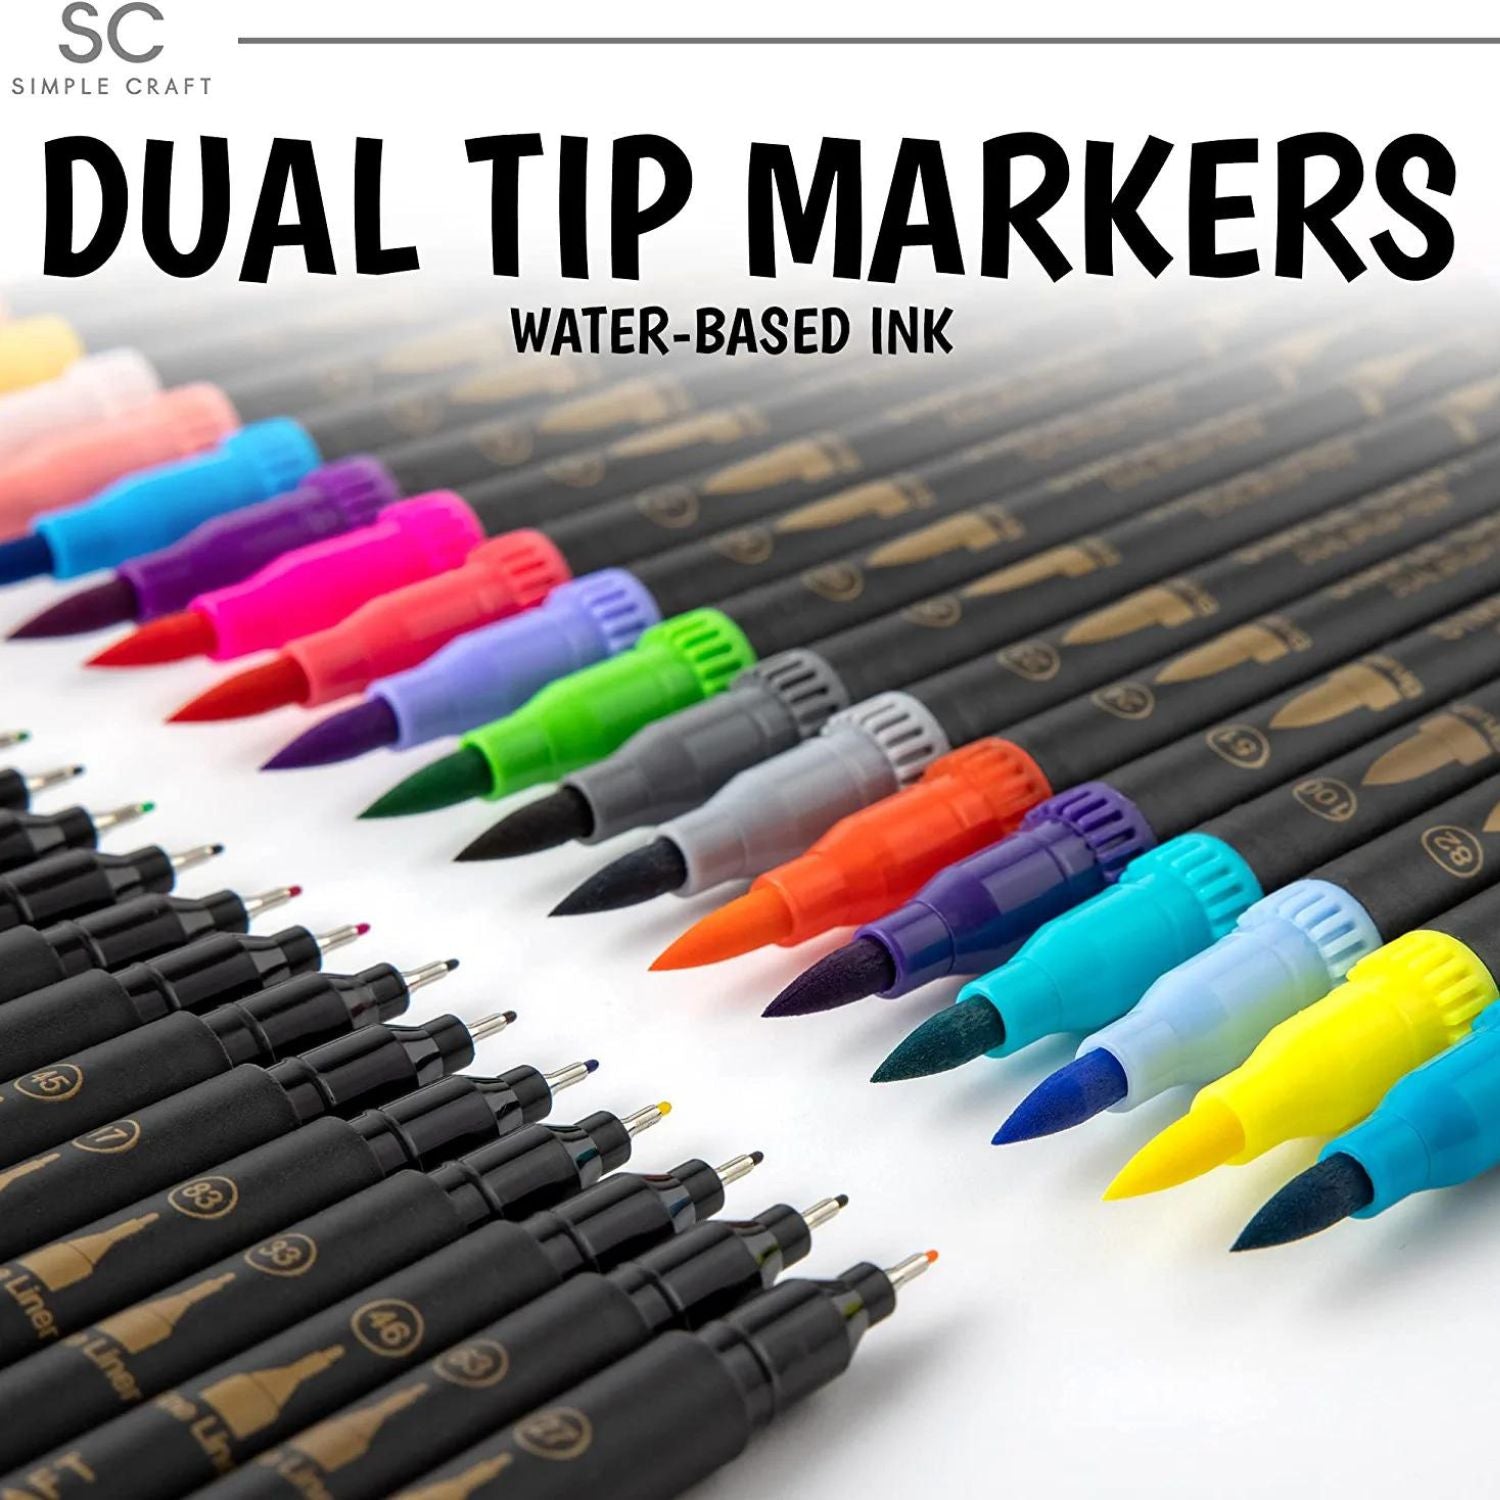 Dual Tip Markers